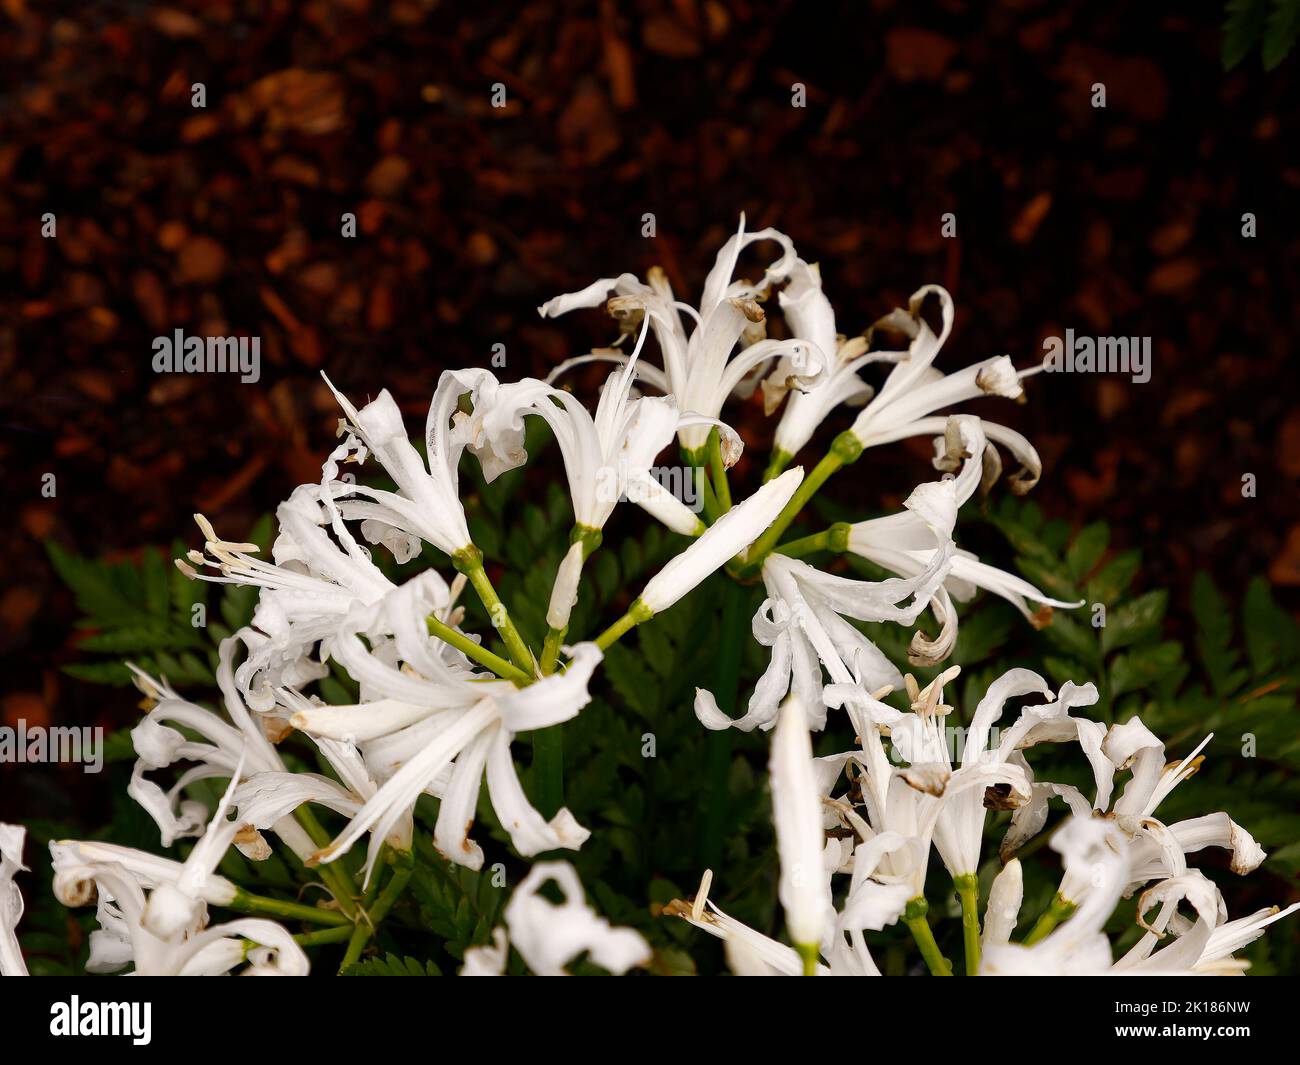 Close up of the flowering garden bulb Nerine bowdenii Alba seen in the UK. Stock Photo